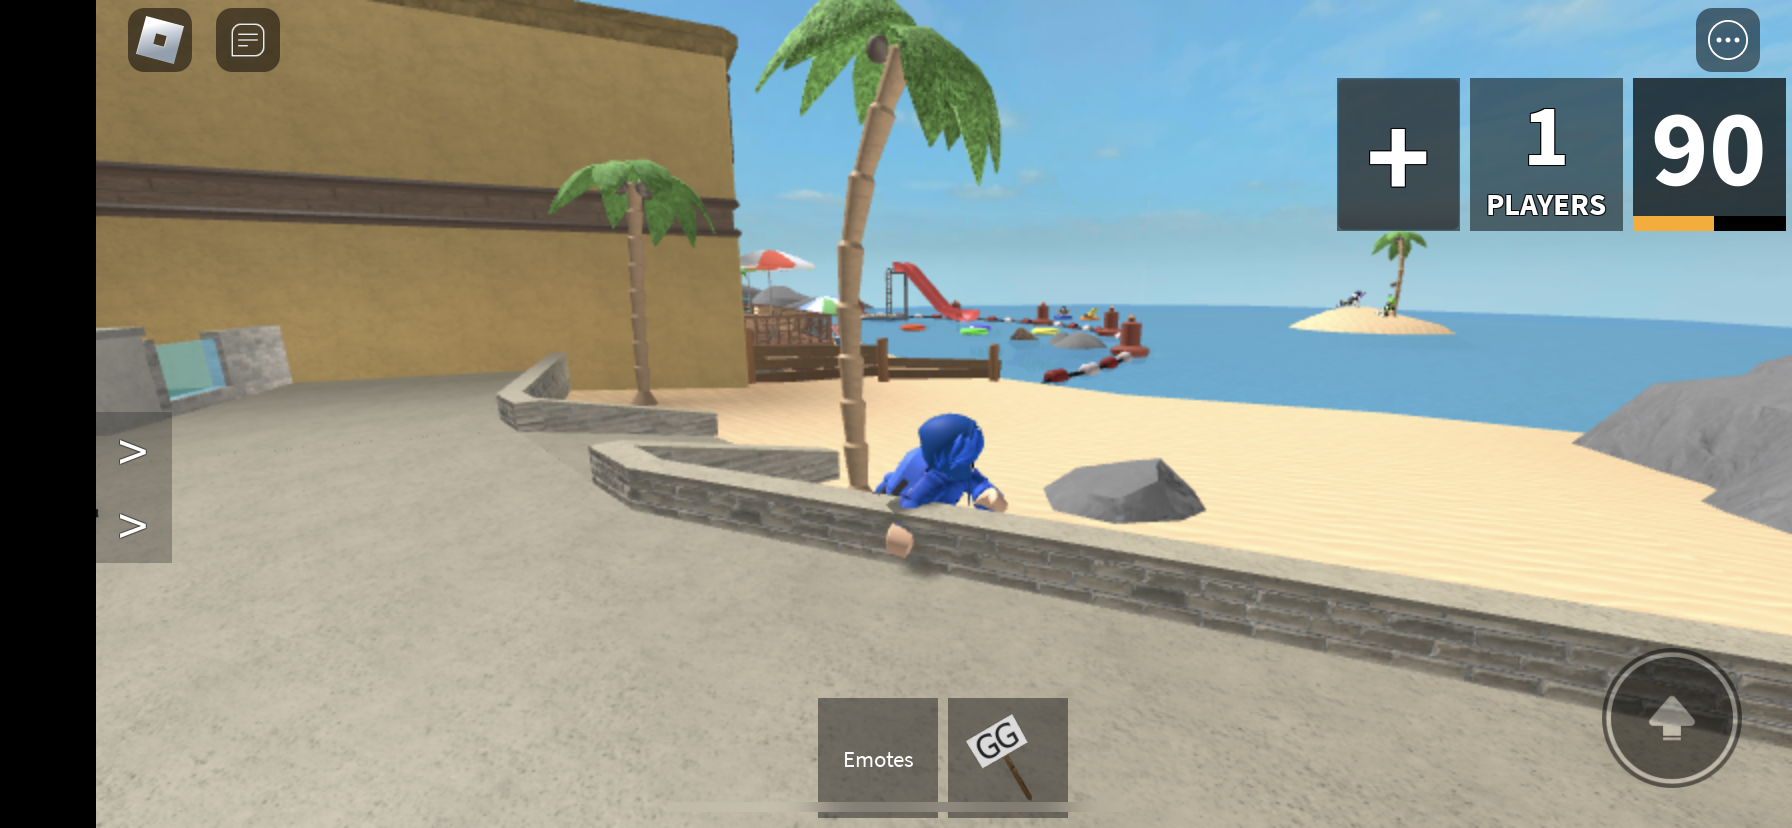 🔴 LIVE, MM2 SUMMER UPDATE COMING SOON